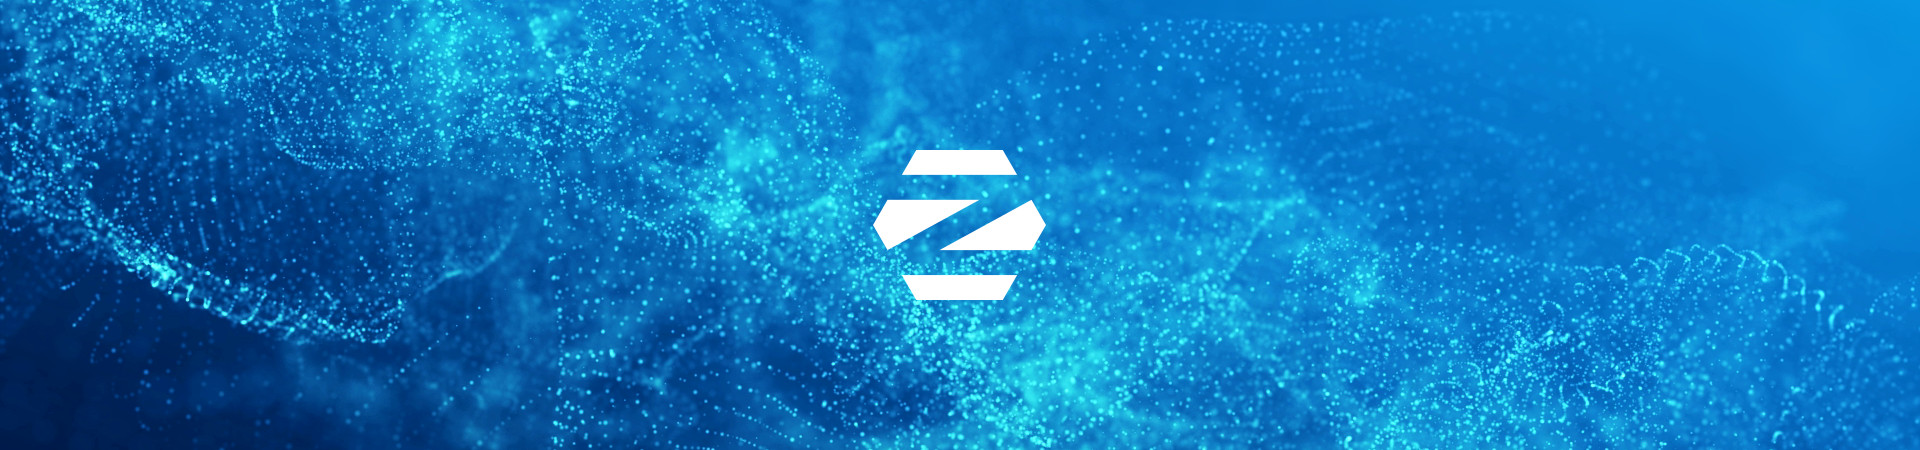 Release Of Zorin Os Core And Ultimate The Main Focus For